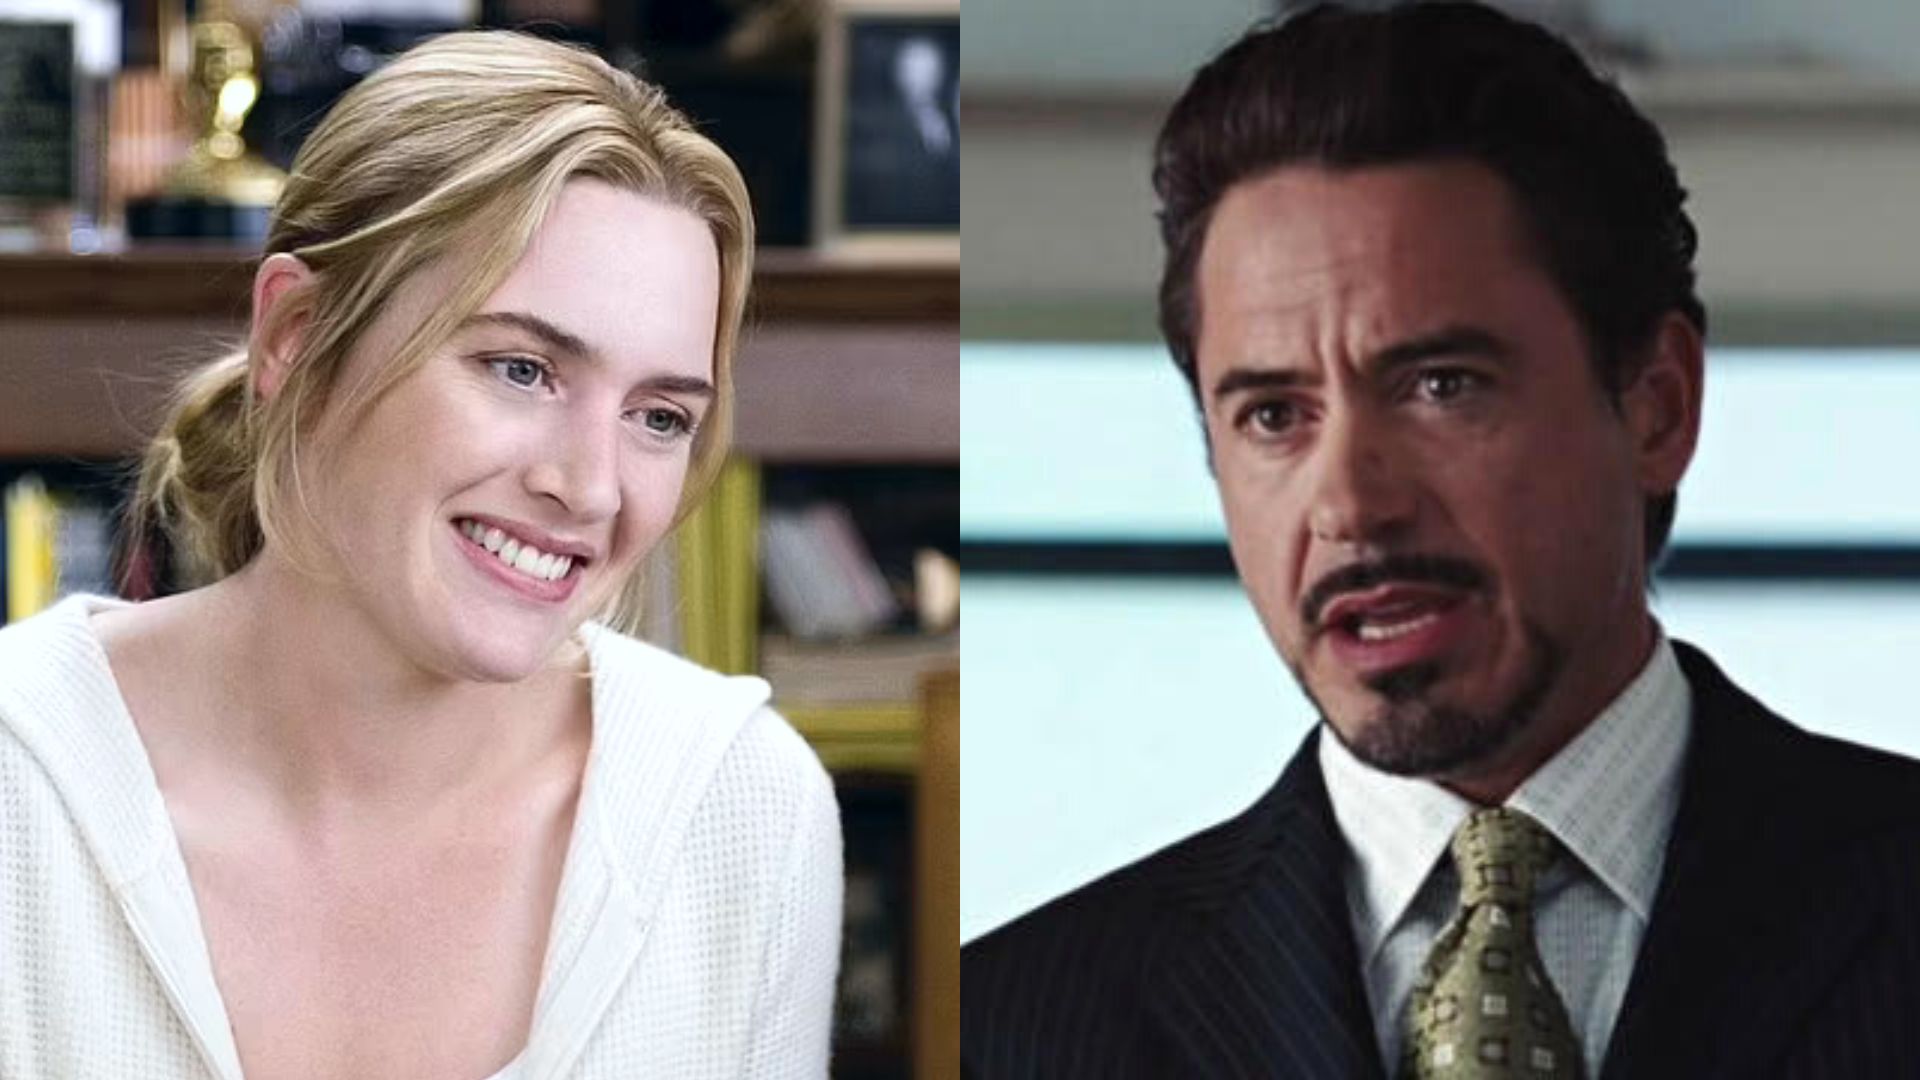 Kate Winslet Roasted Robert Downey Jr. While Telling The Story Behind The Time He And Jimmy Fallon Auditioned For The Holiday